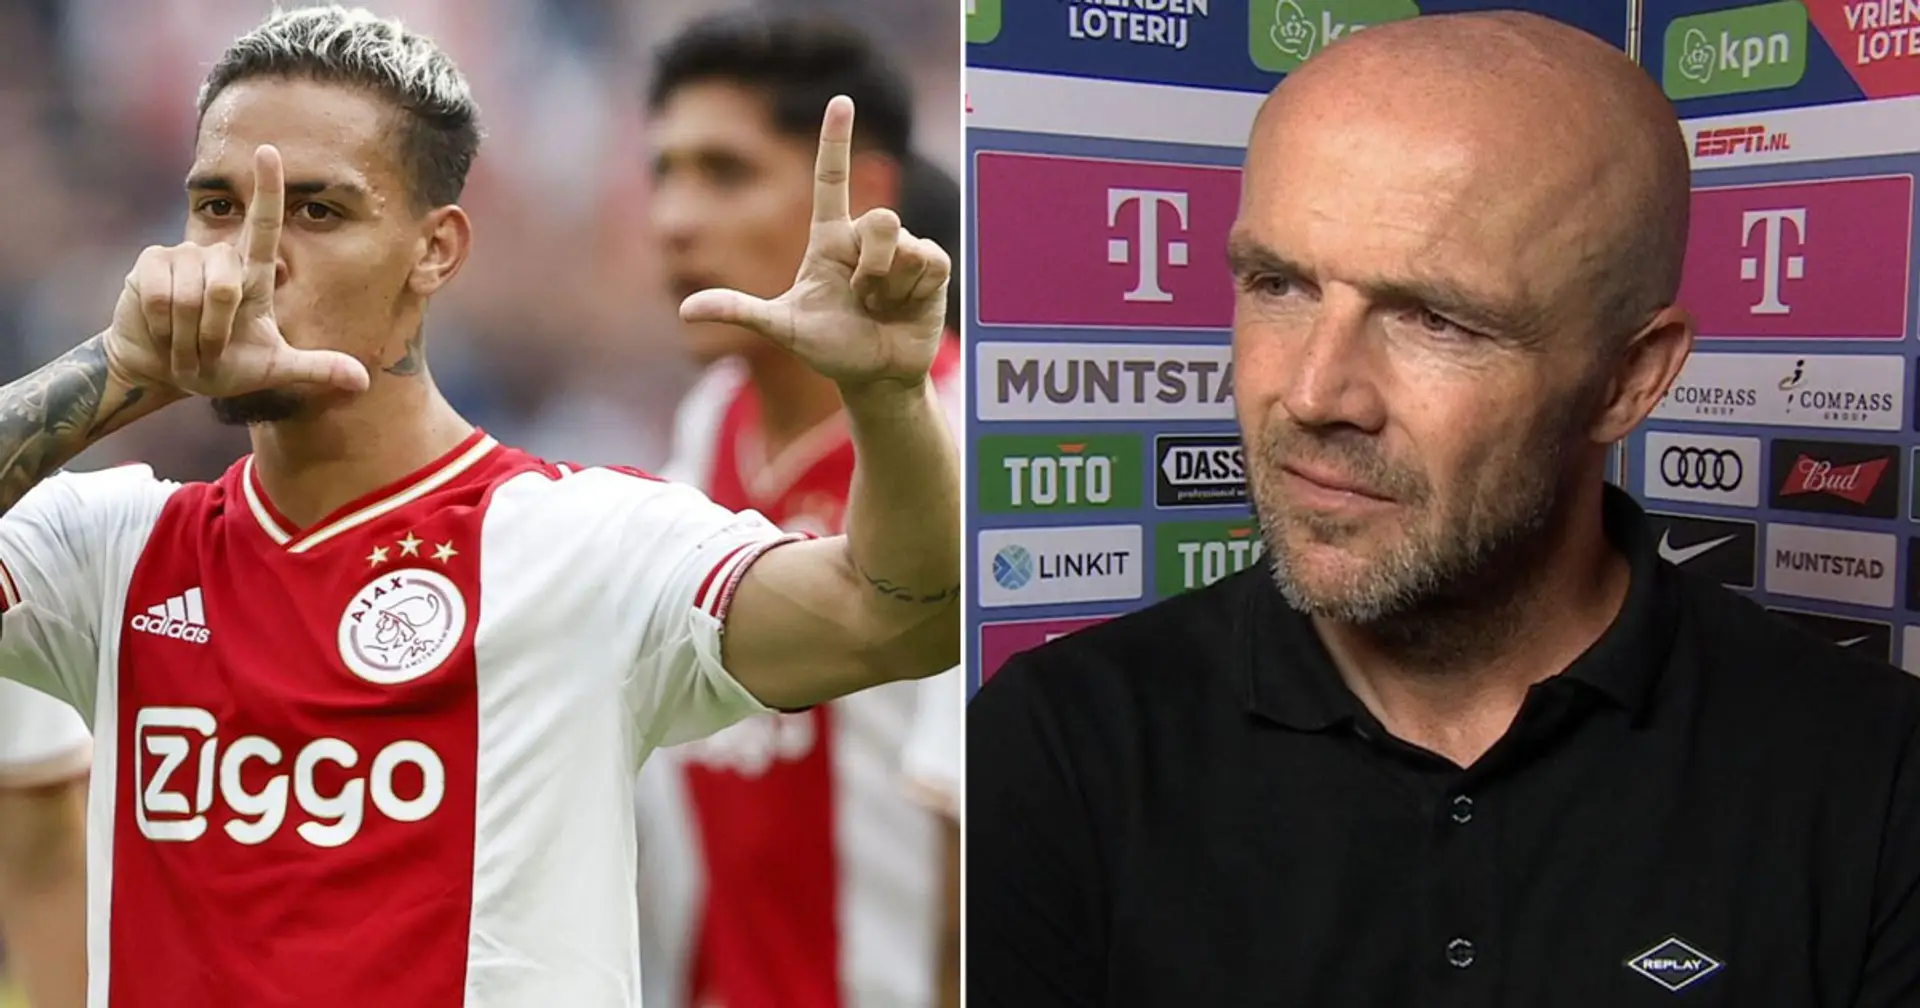 'Different phases of the same thing': United fan gives brilliant response to Ajax manager’s 'everything's about money' rant